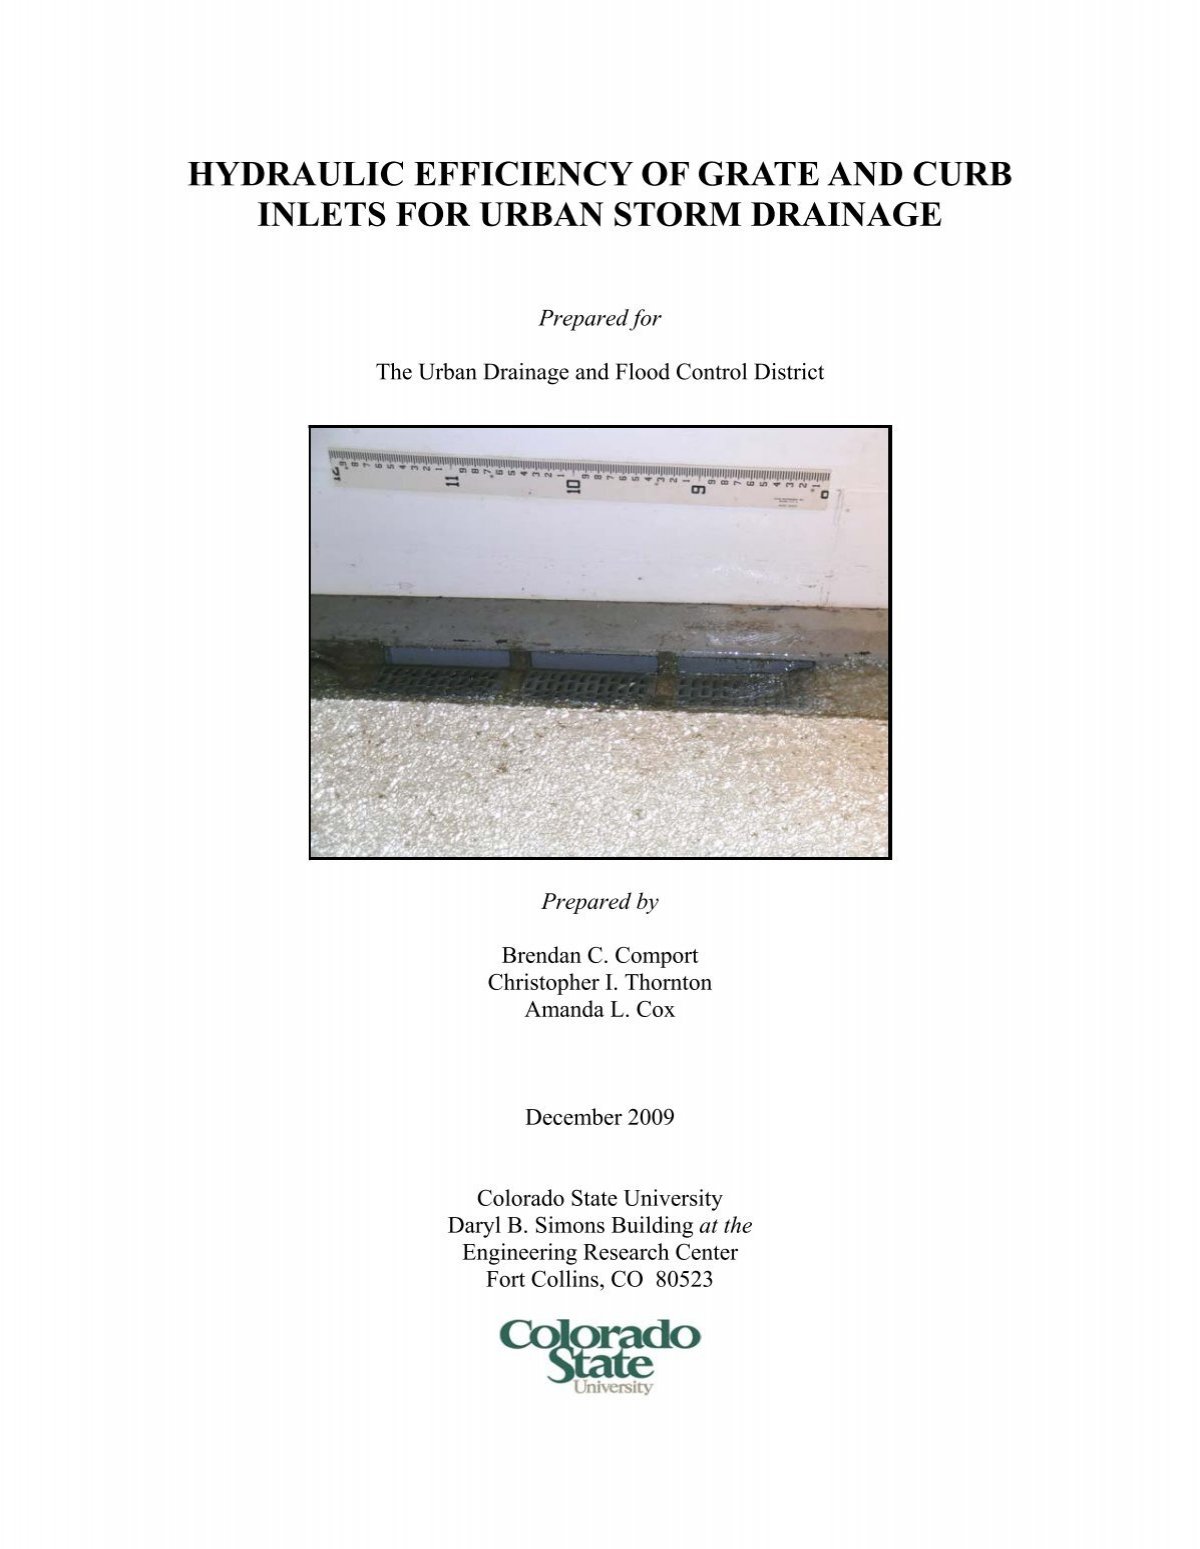 Hydraulic Efficiency Of Grate And Curb Inlets Urban Drainage And